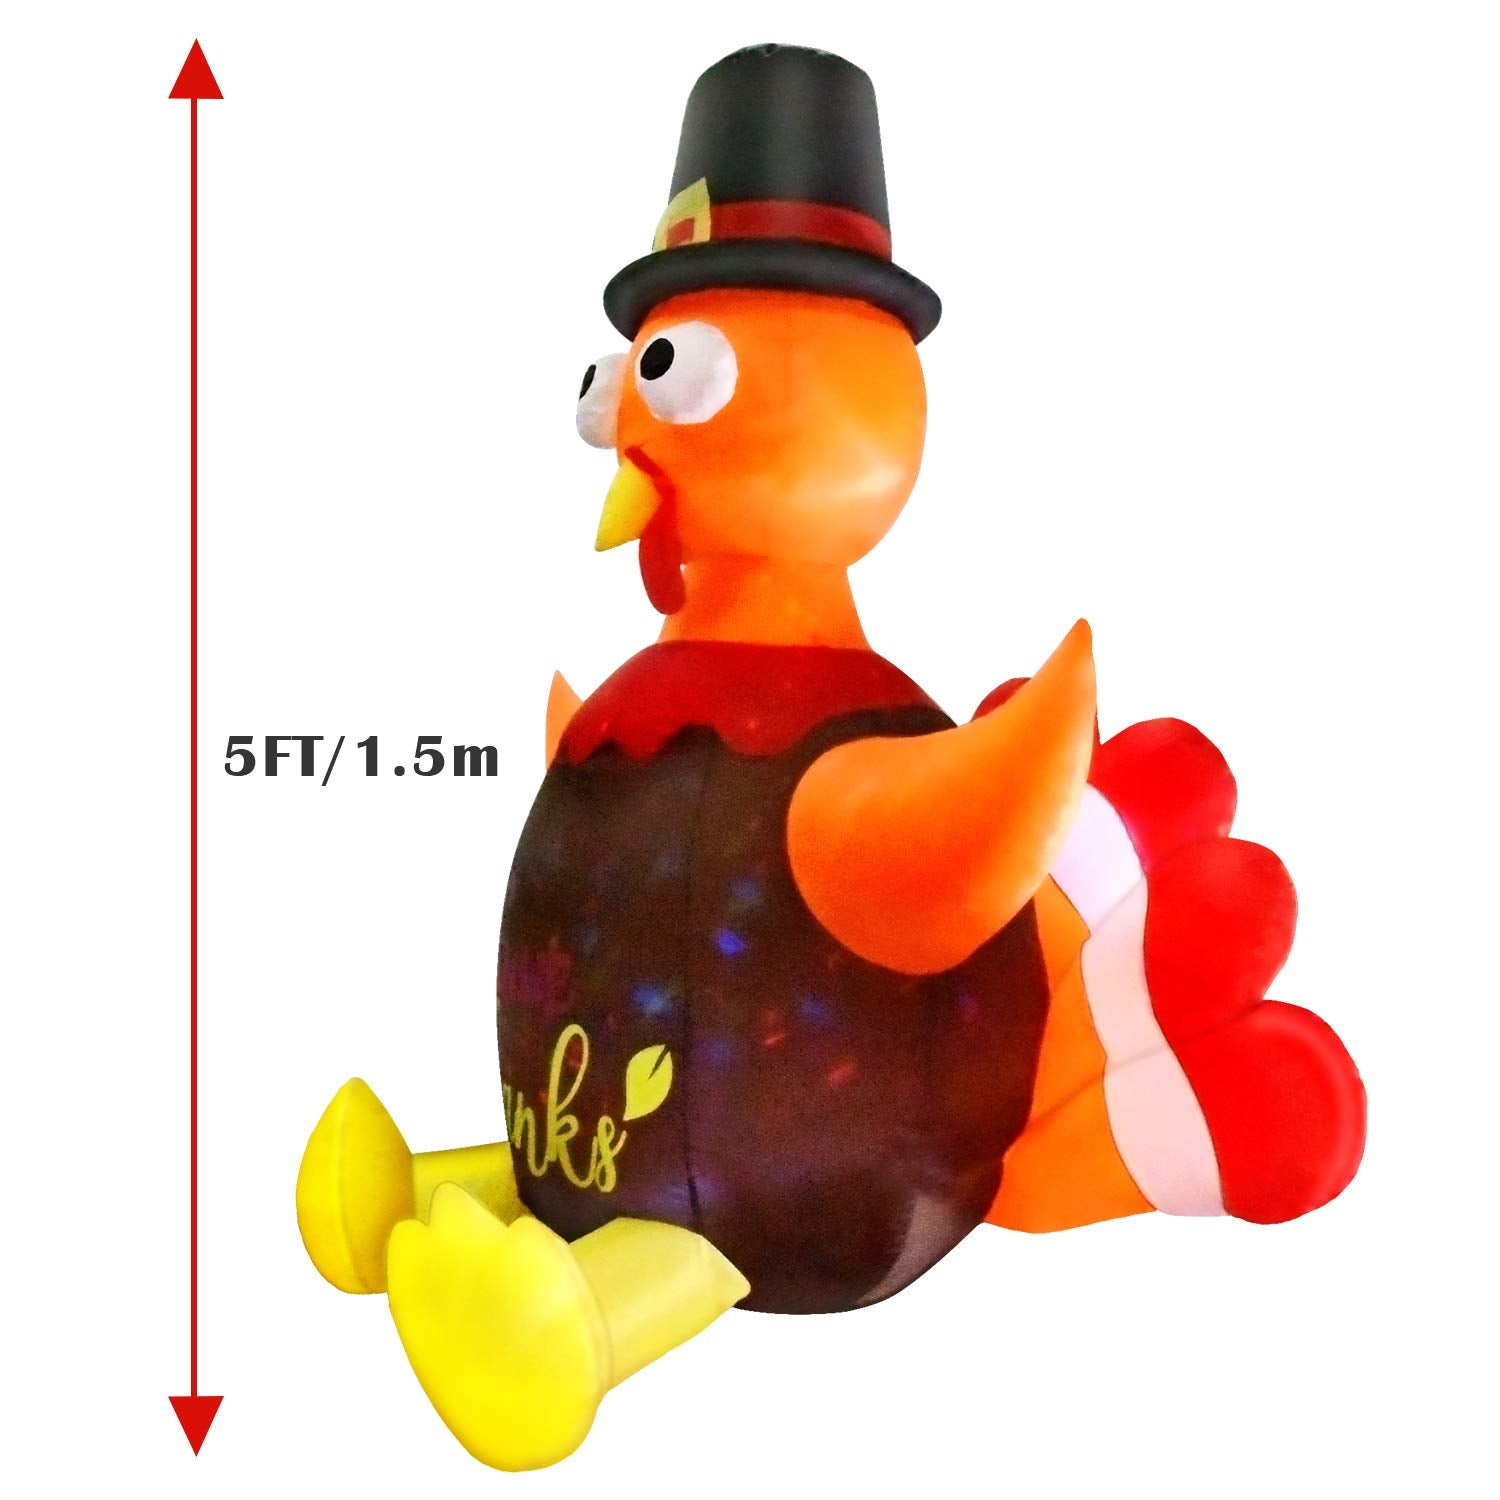 5FT Thanksgiving Inflatable Turkey with Pilgrim Hat, Built-in Rotating LED Colorful Lights Thanksgiving Autumn Decor, Blow up Lighted Outdoor Indoor Holiday Yard Lawn Decoration